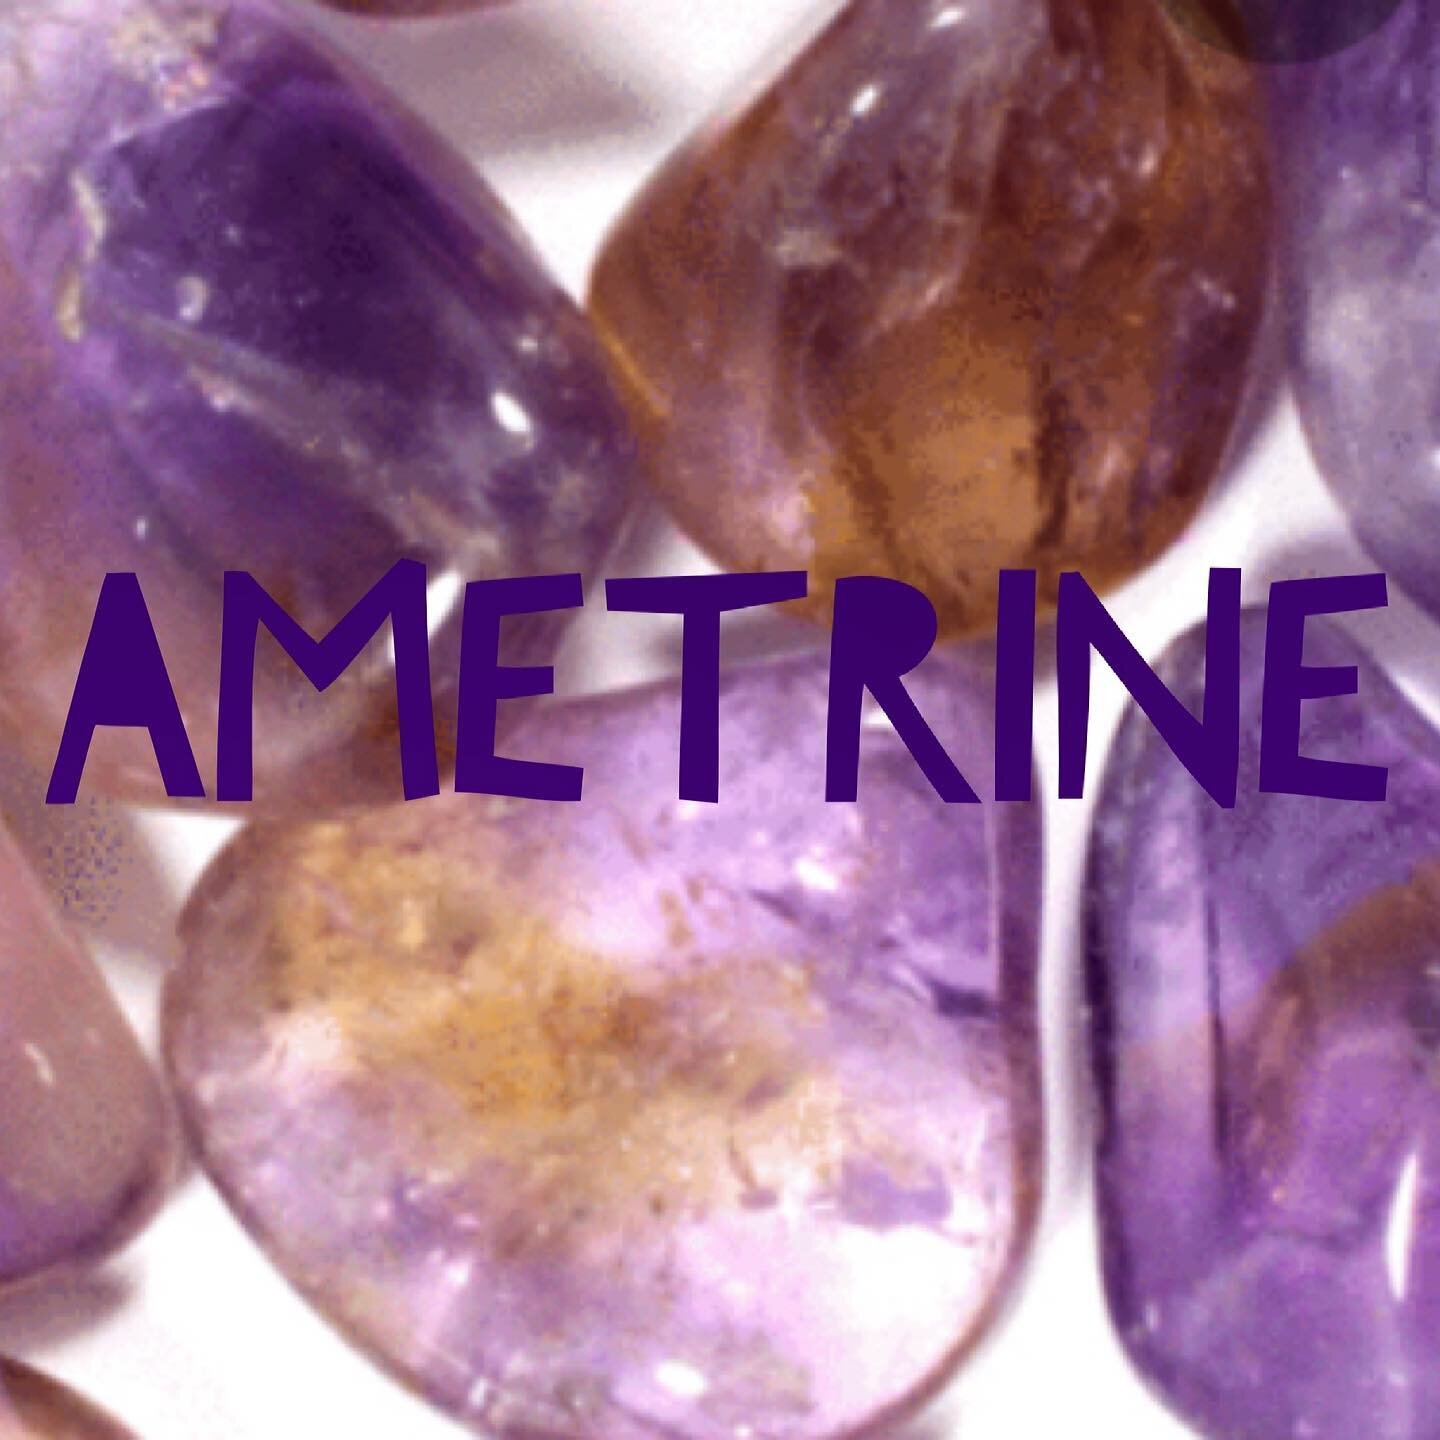 Happy soulful Saturday! We have a gorgeous stone most haven&rsquo;t even heard of before. Featuring Ametrine! This is the perfect crystal for stimulating #creativity and boosting #selfconfidence
💜
Take this stone with you when you are going to a net